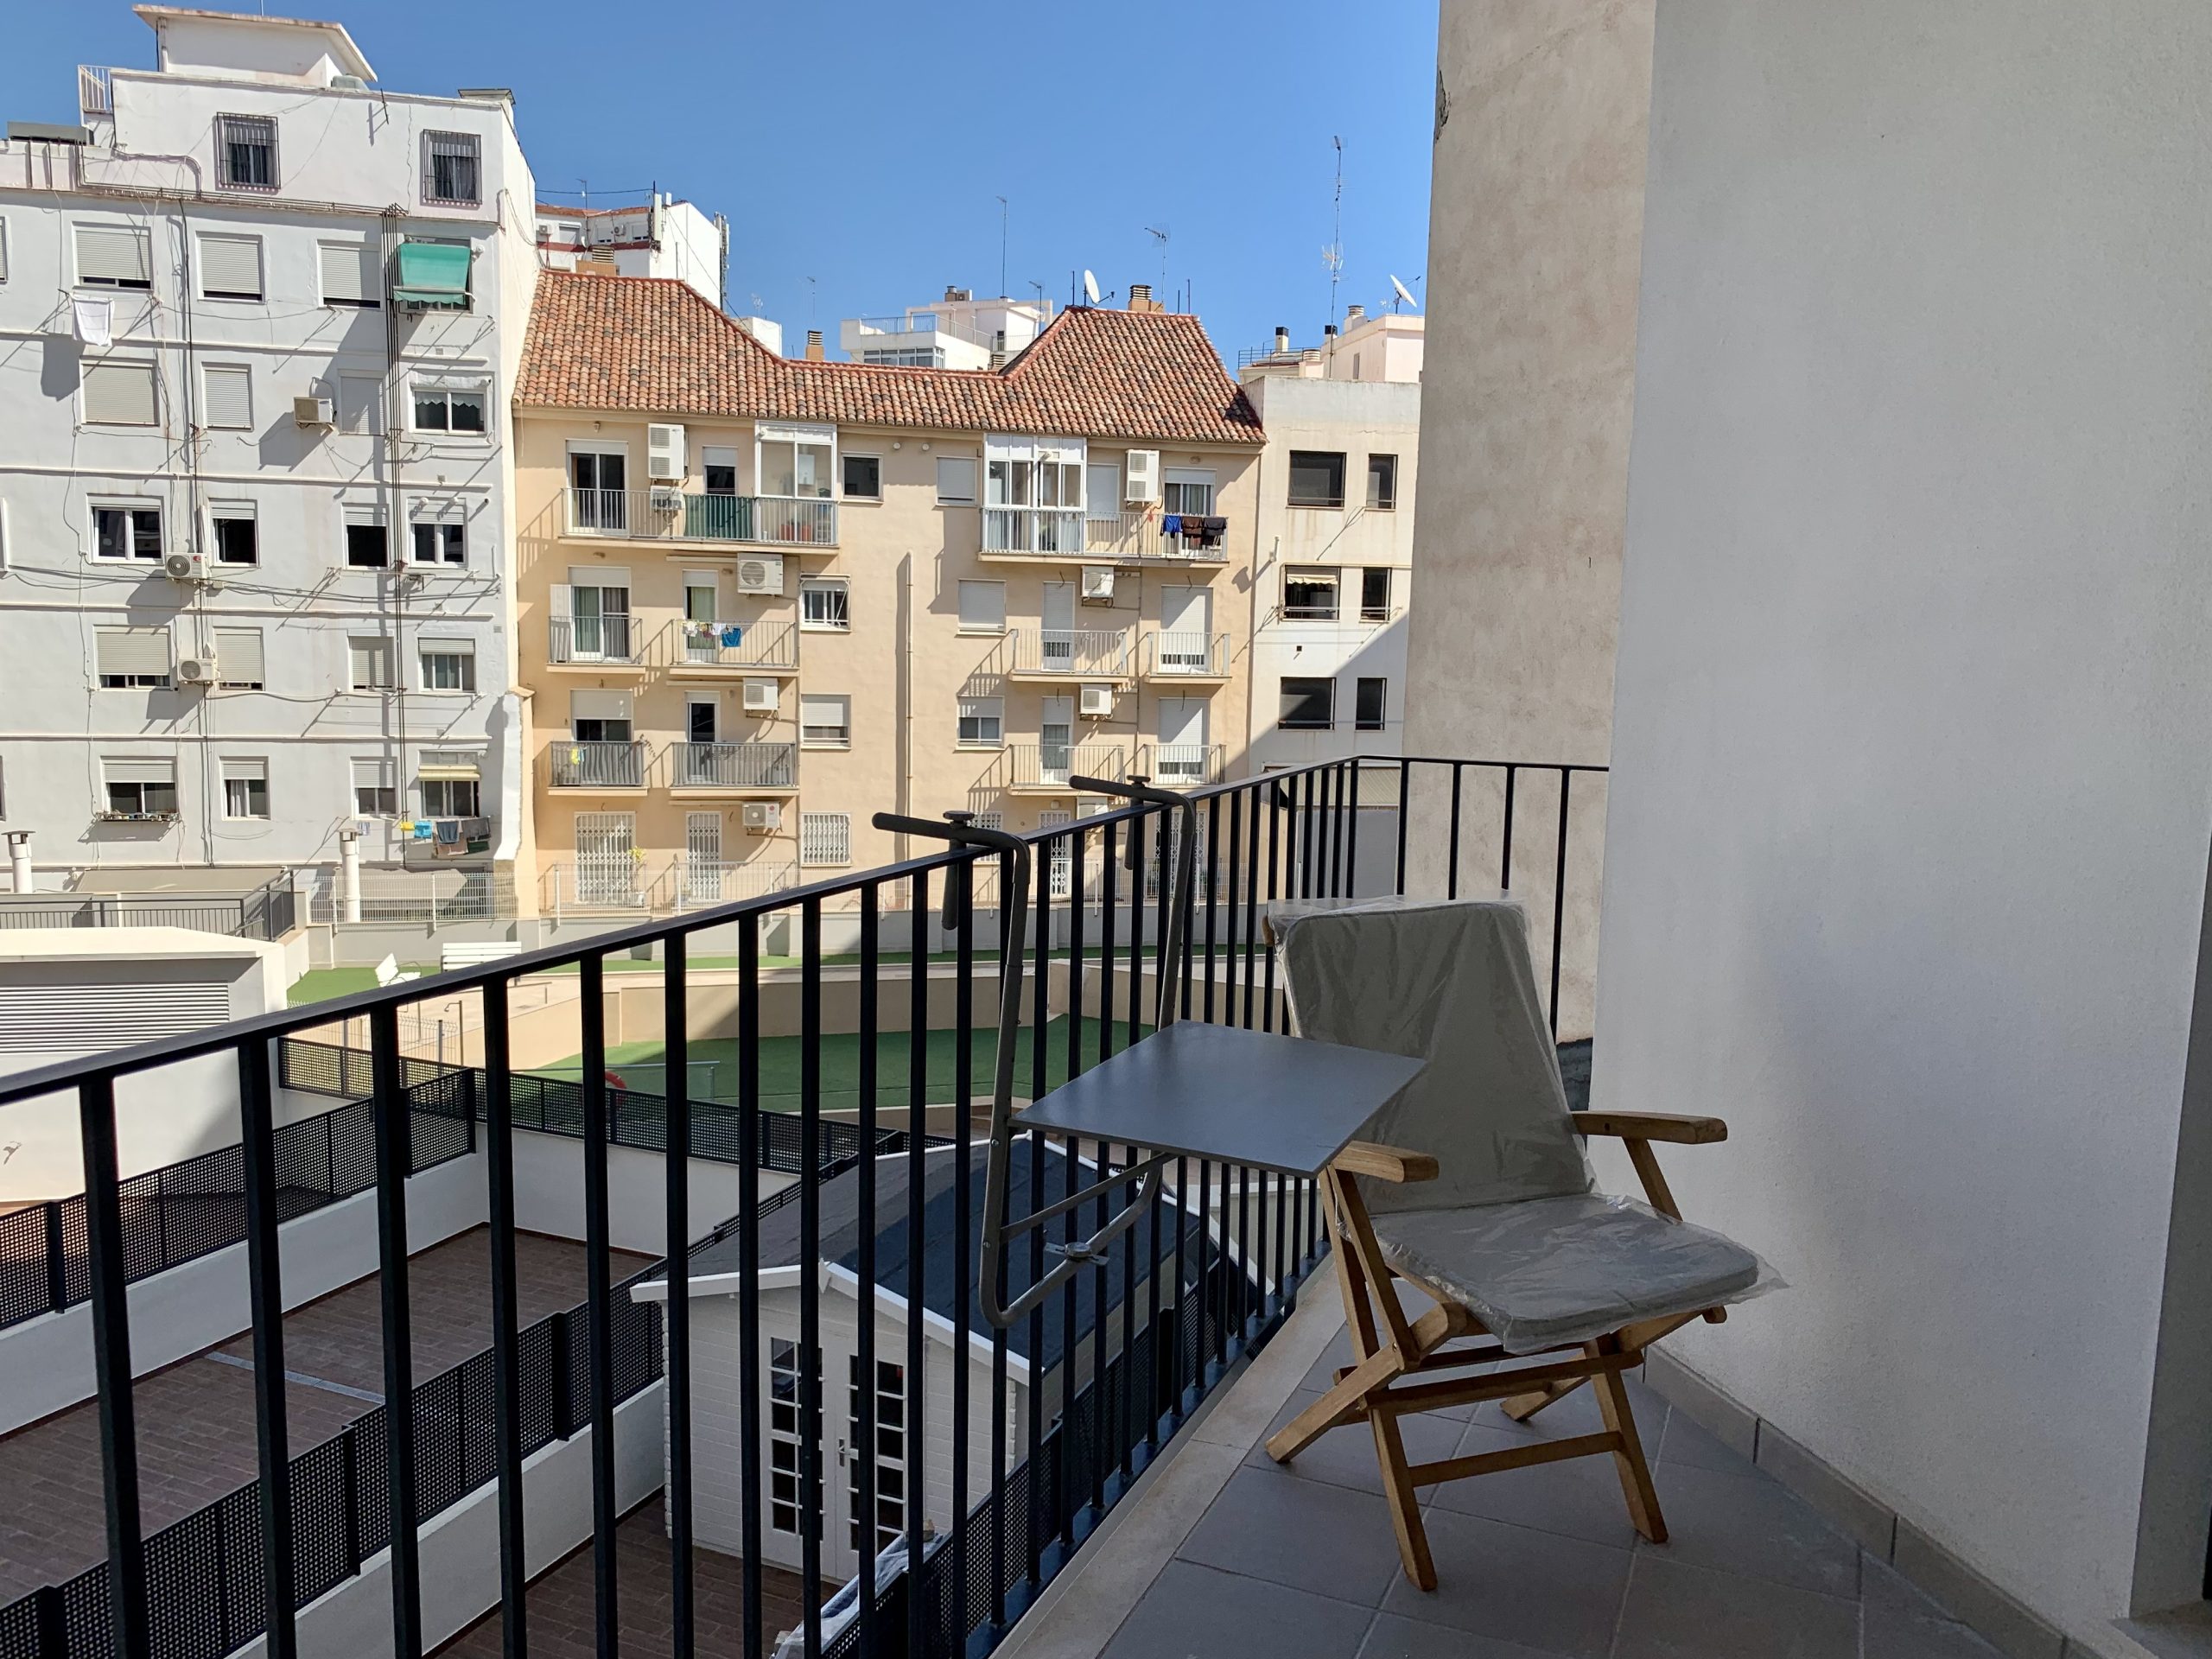 Palleter - Exclusive apartment for rent in Valencia